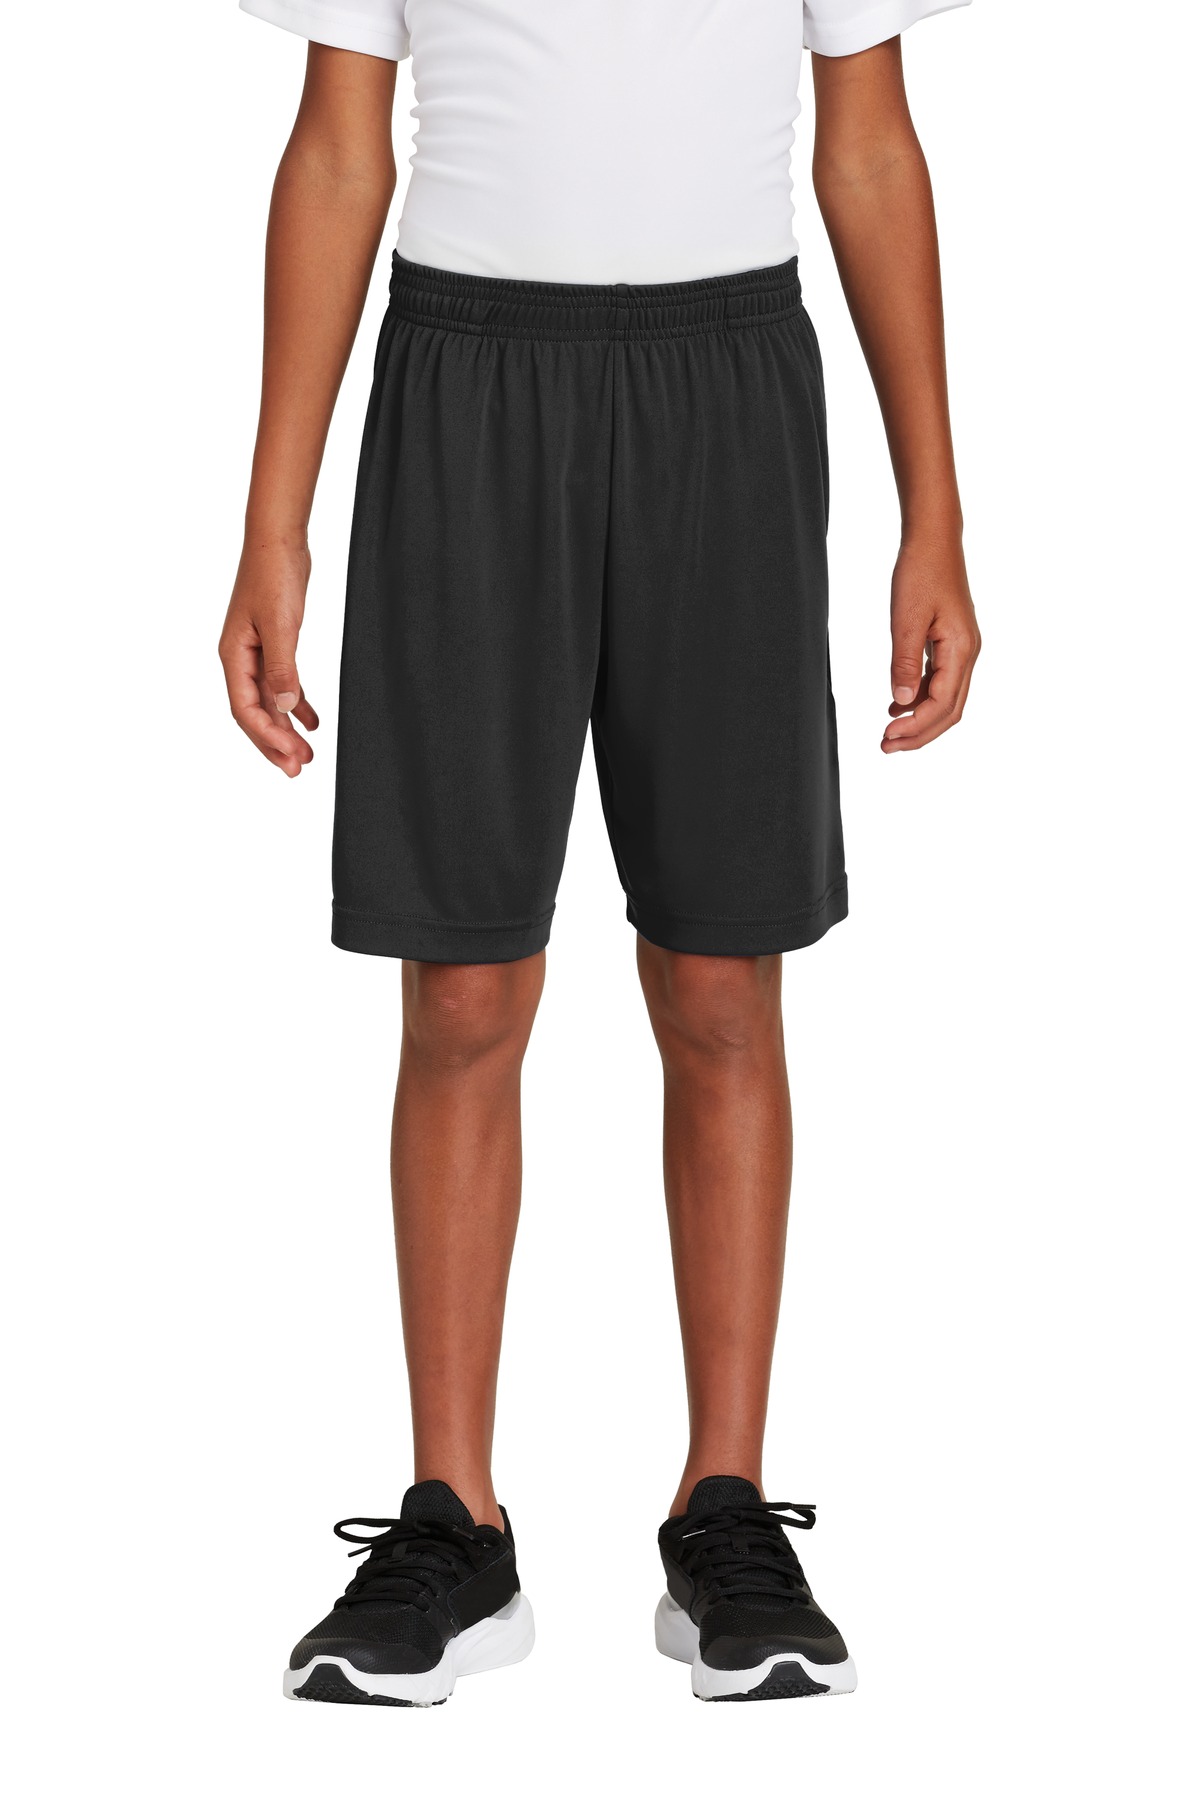 Sport-Tek Youth Activewear for Hospitality ® Youth PosiCharge ® Competitor Pocketed Short.-Sport-Tek